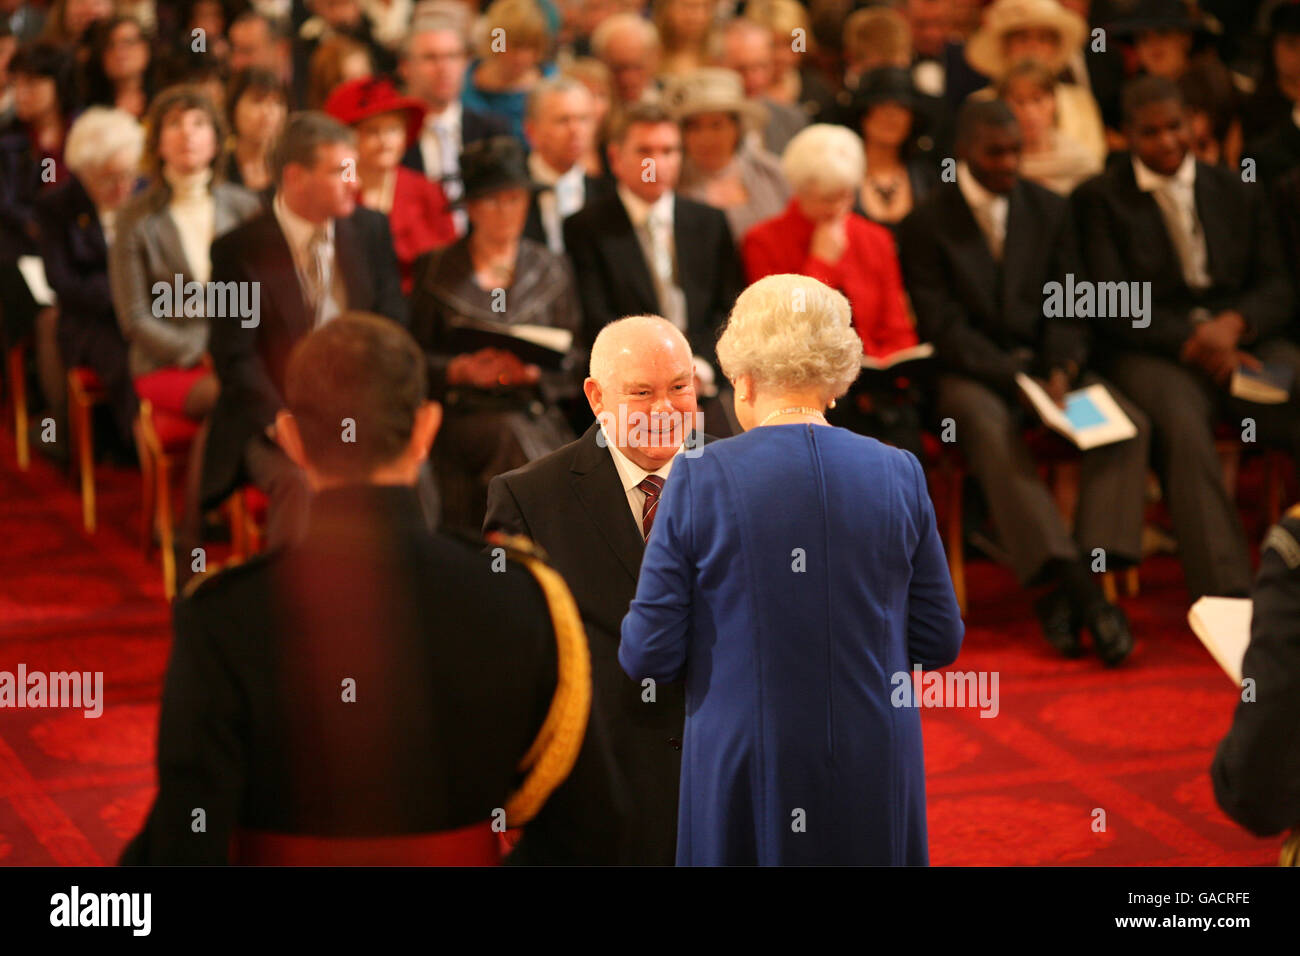 Mr. Harry Clements, from Leeds, is made an MBE by The Queen at Buckingham Palace. Stock Photo